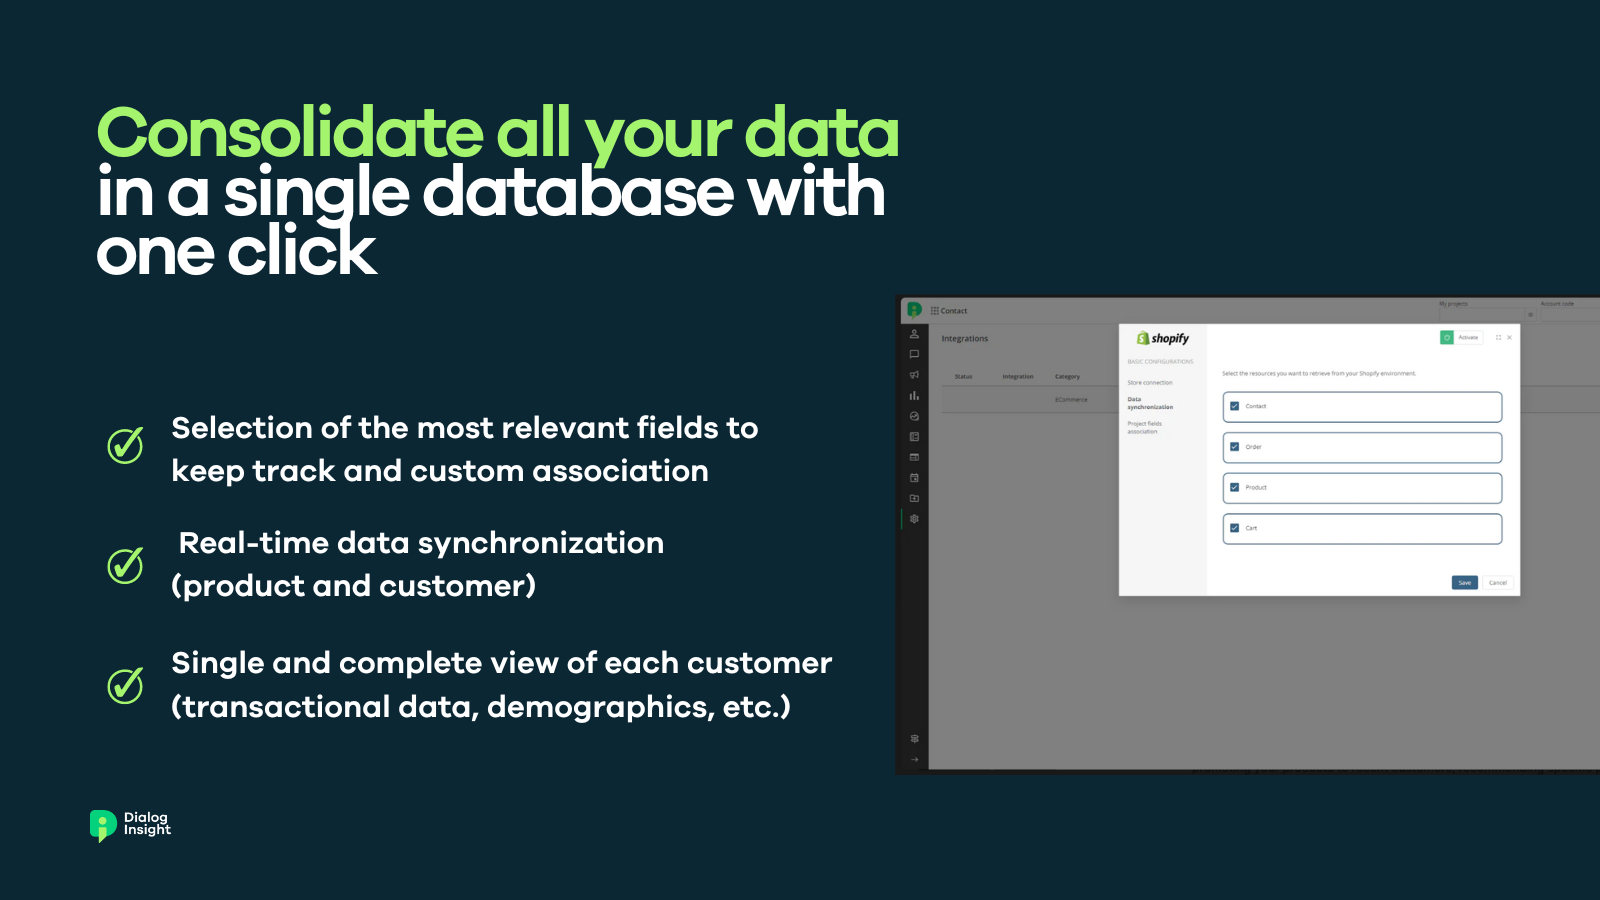 Consolidate all your data